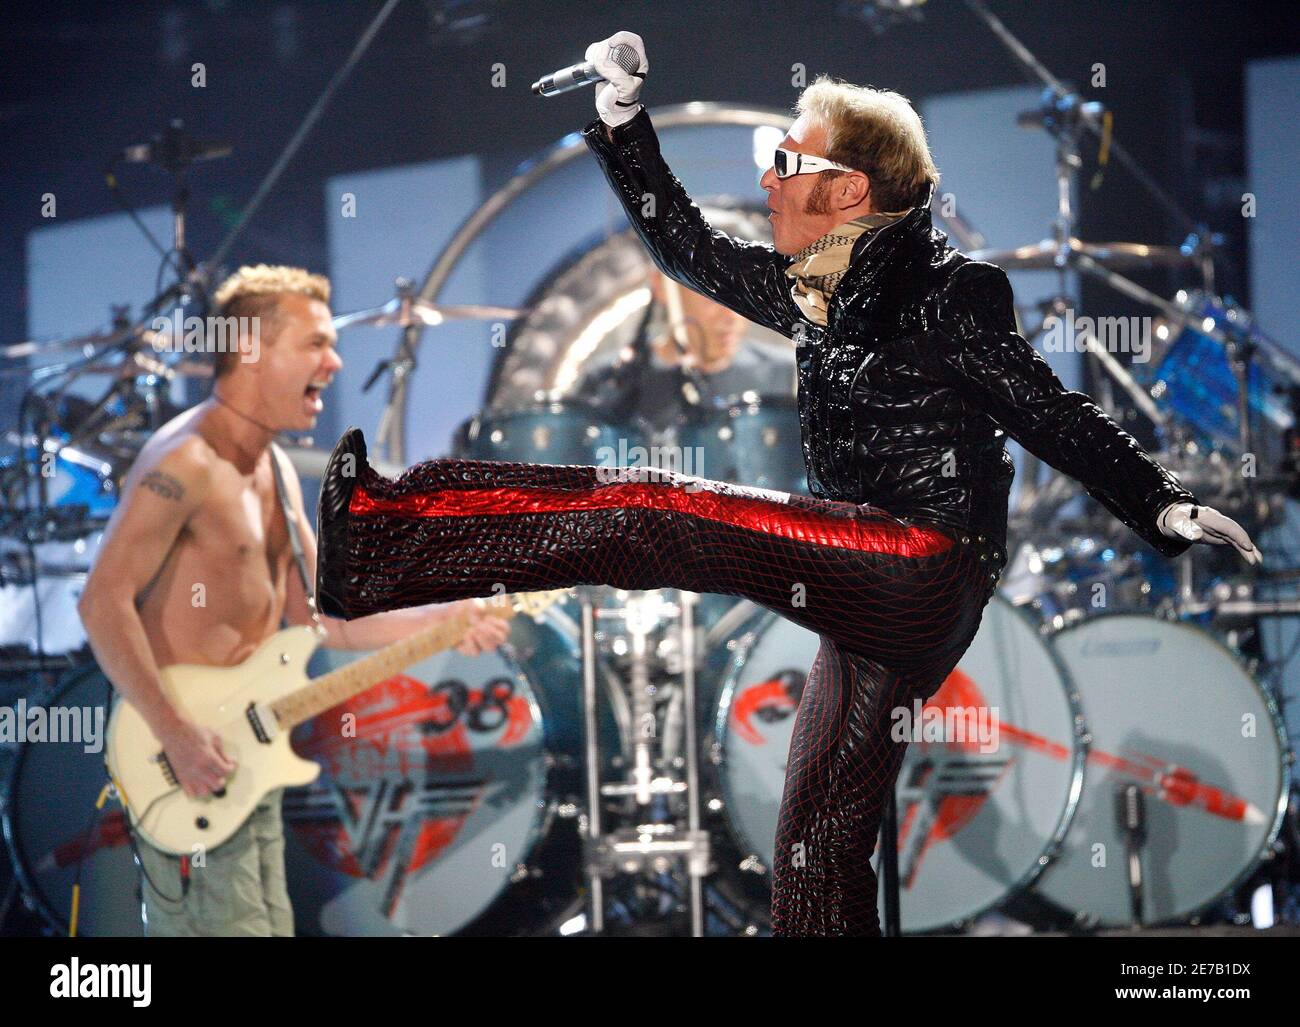 David Lee Roth (R) and Eddie Van Halen of Van Halen perform at Tiger Jam XI in Las Vegas April 19, 2008. Tiger Jam, an AT&T sponsored event, is a fundraiser for the Tiger Woods Foundation which funds a variety of youth programs.  REUTERS/Mario Anzuoni   (UNITED STATES) Stock Photo